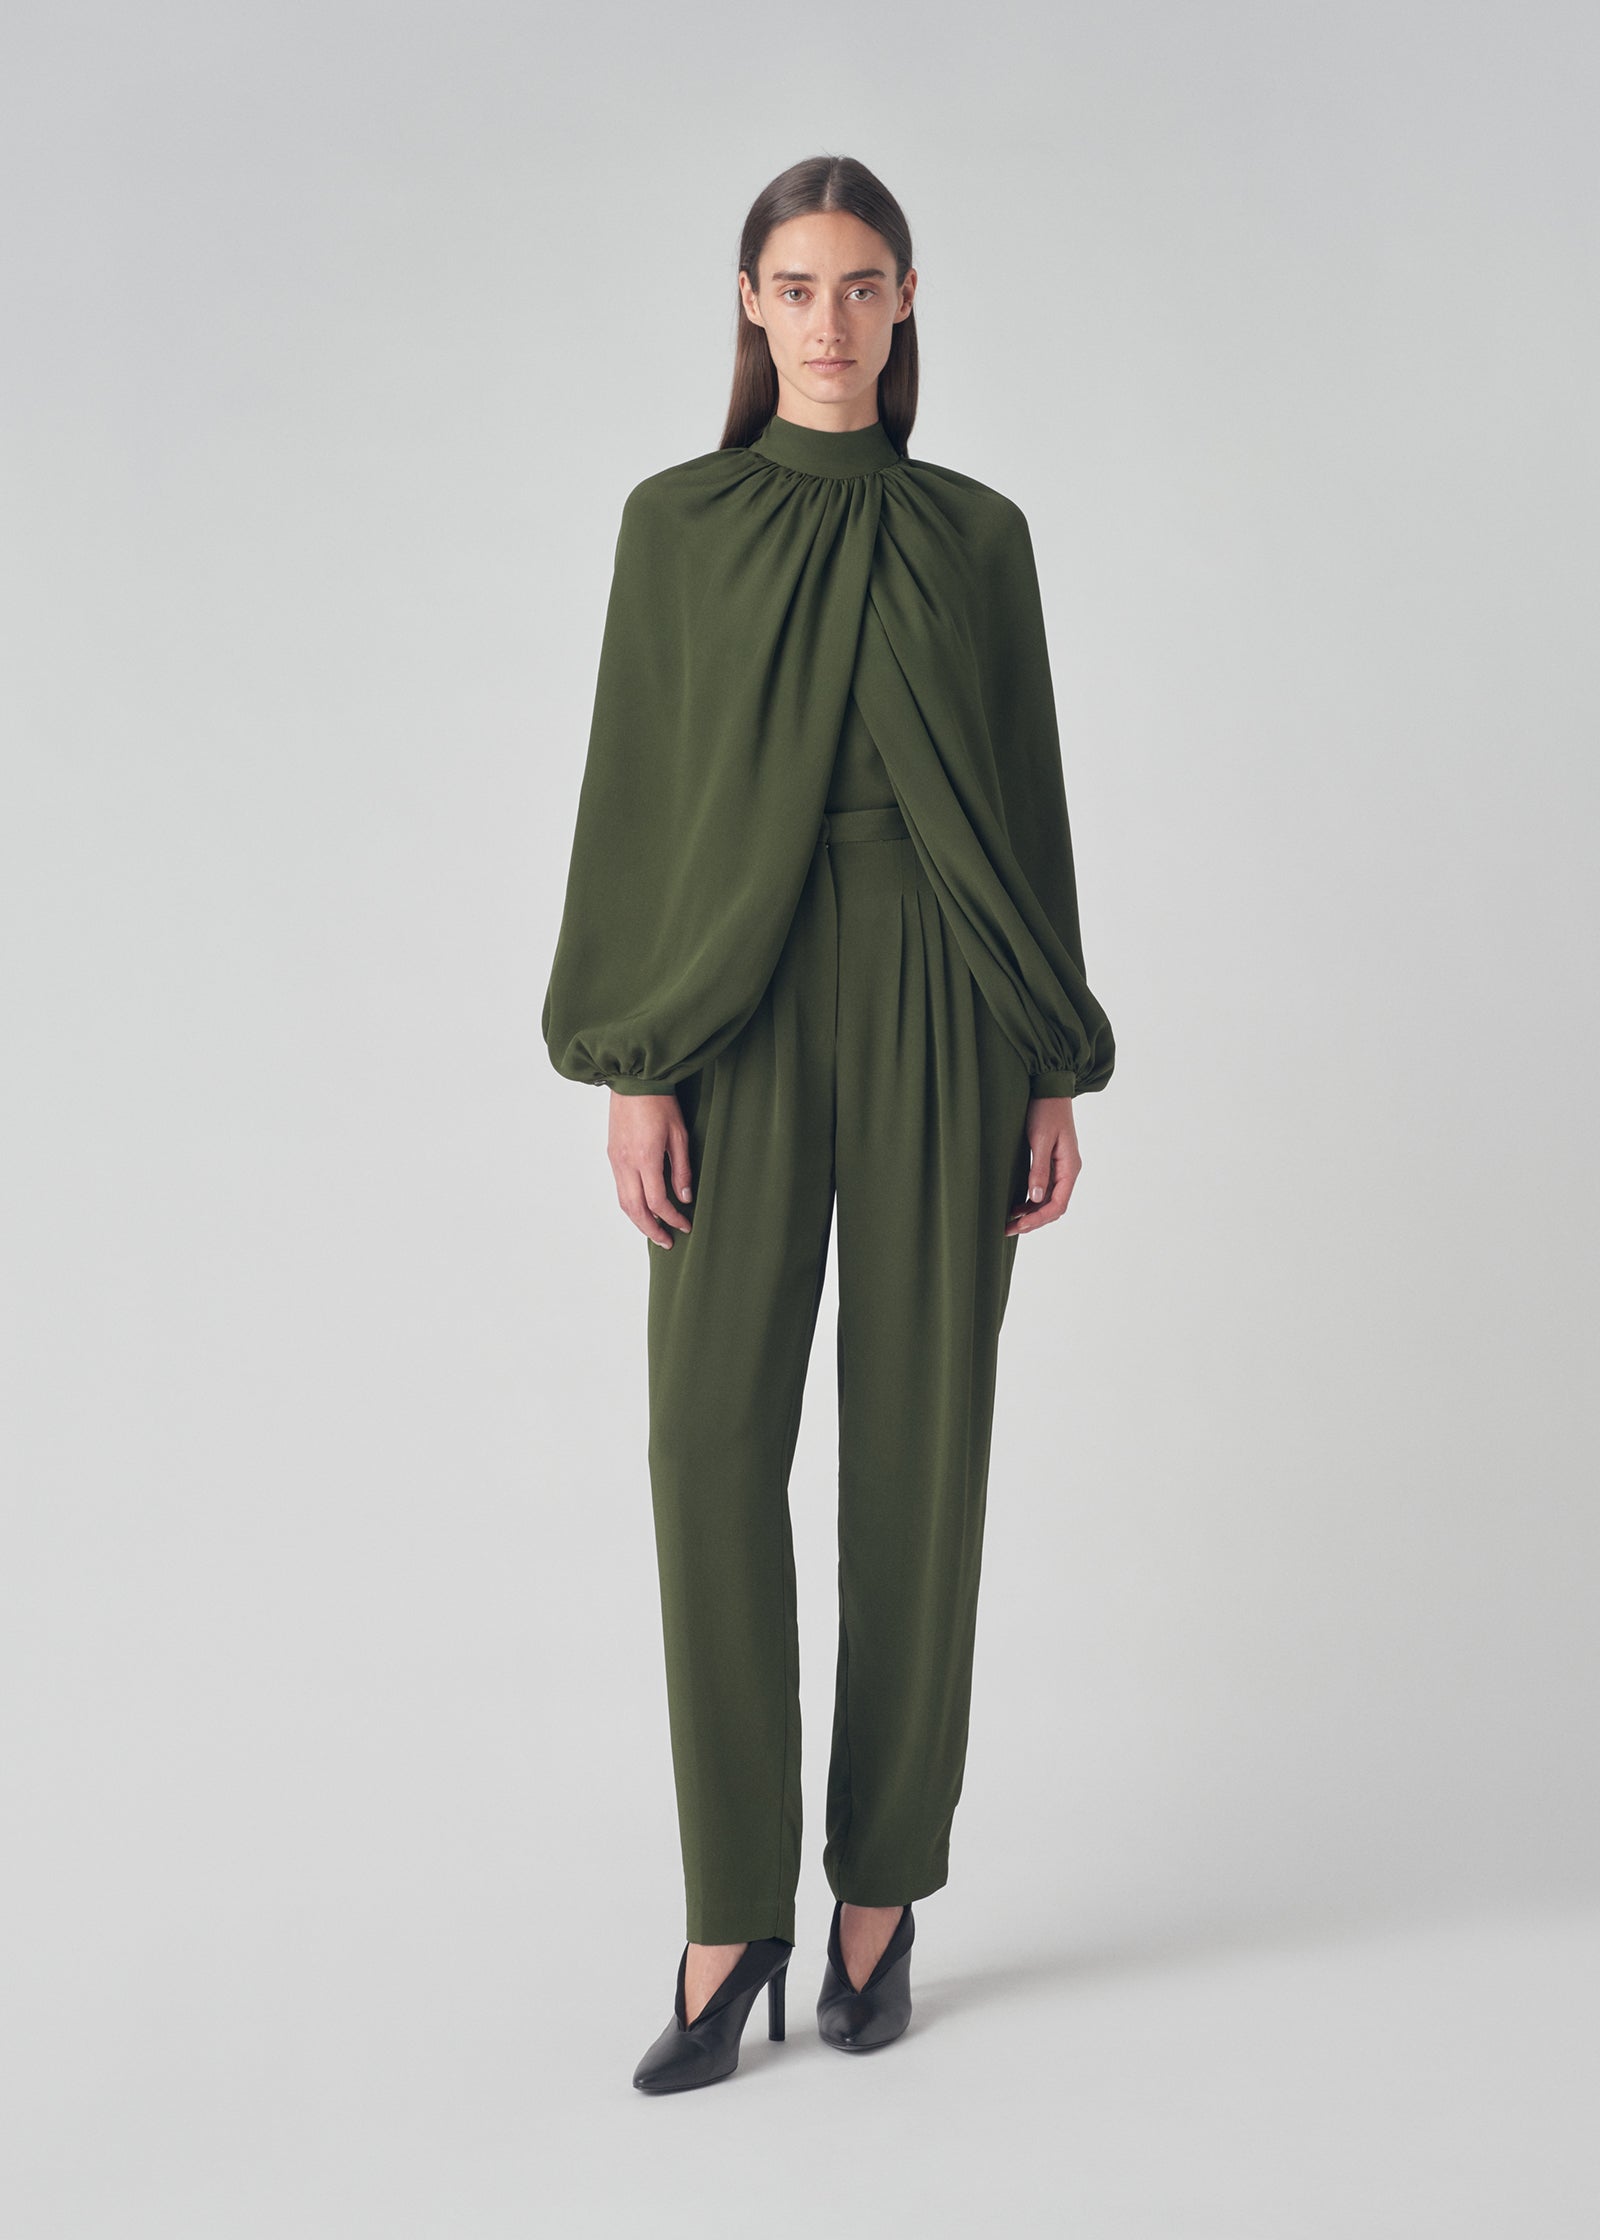 Long Sleeve Draped Blouse in Silk Cady - Green - CO Collections